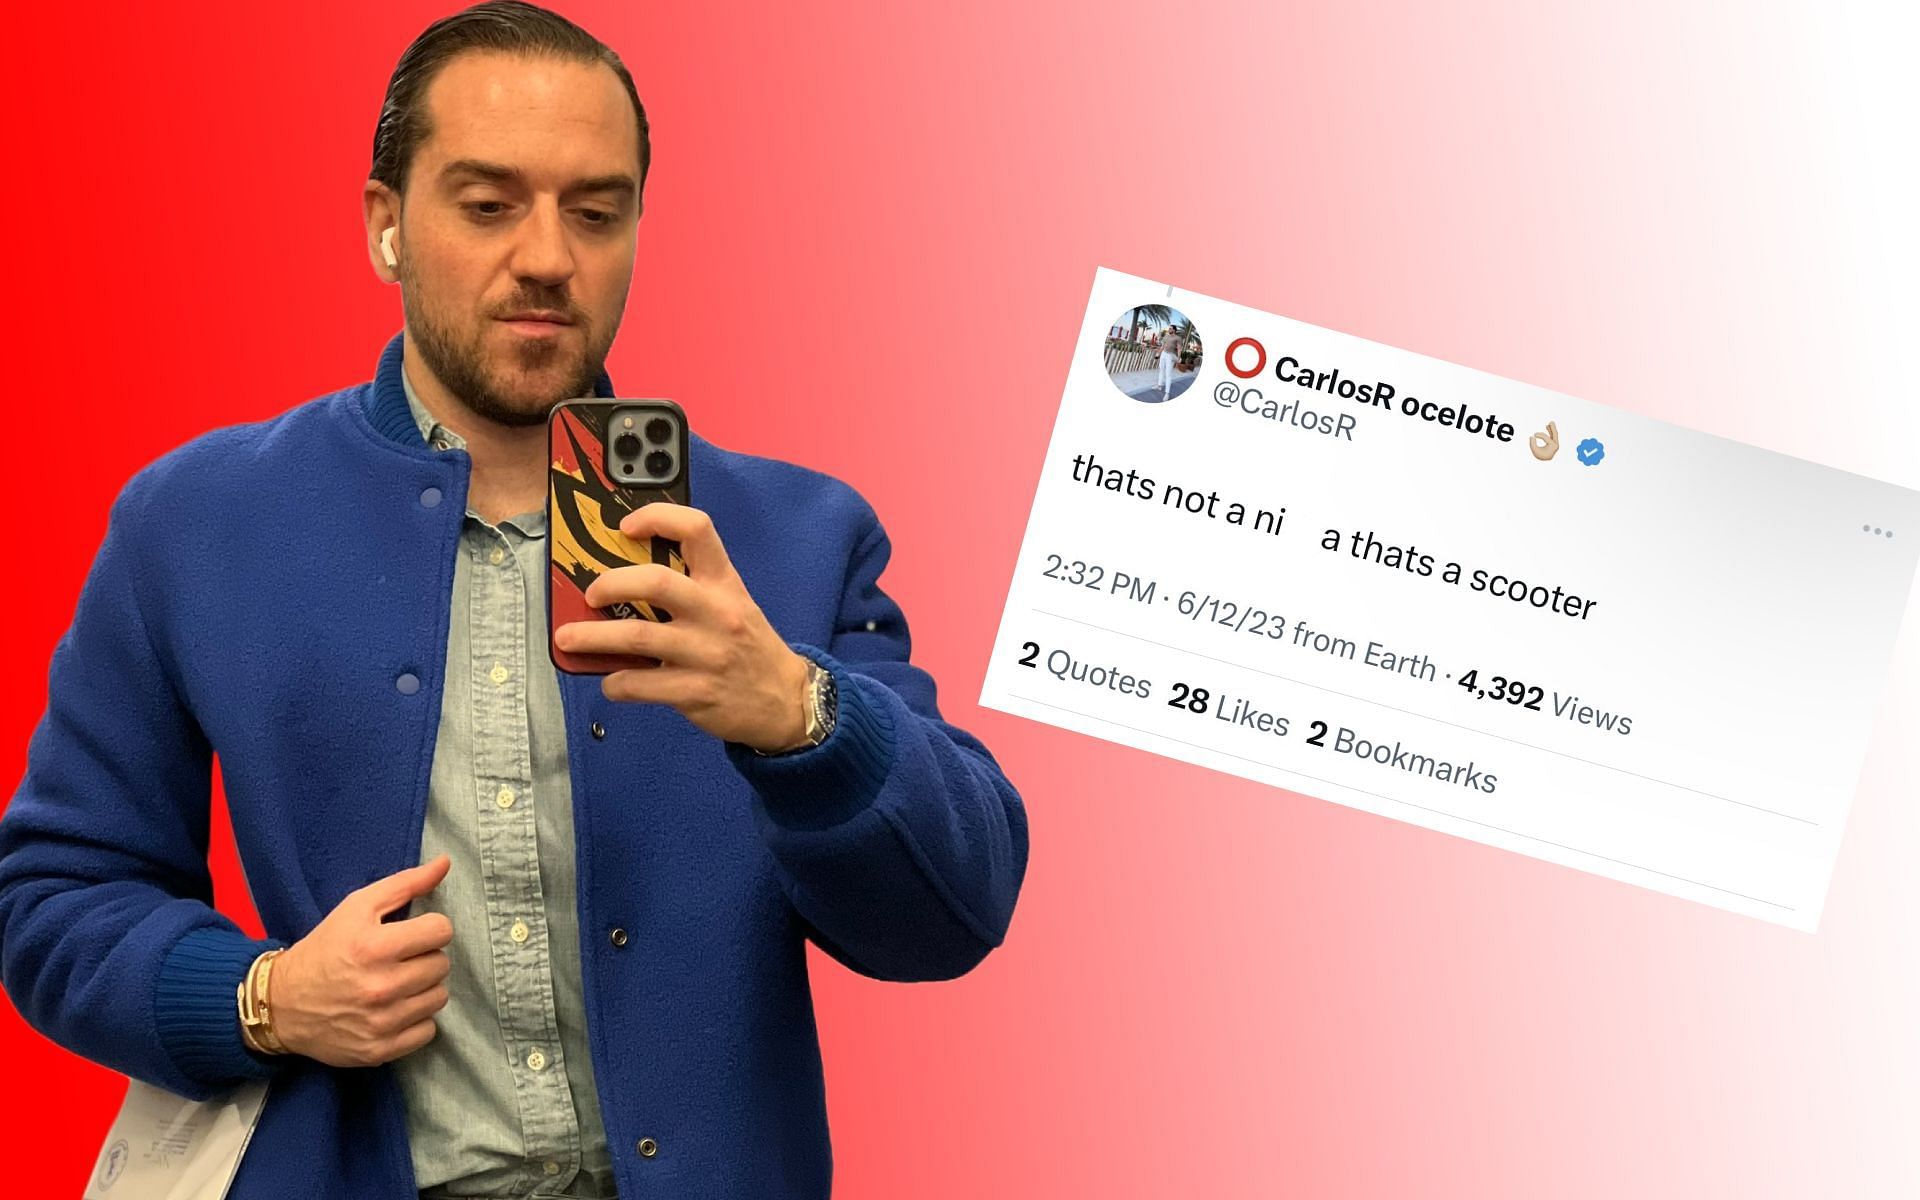 Controversial personality Carlos responds after using the N-word on Twitter (Images via CarlosR, Jake Lucky/Twitter, and Sportskeeda)